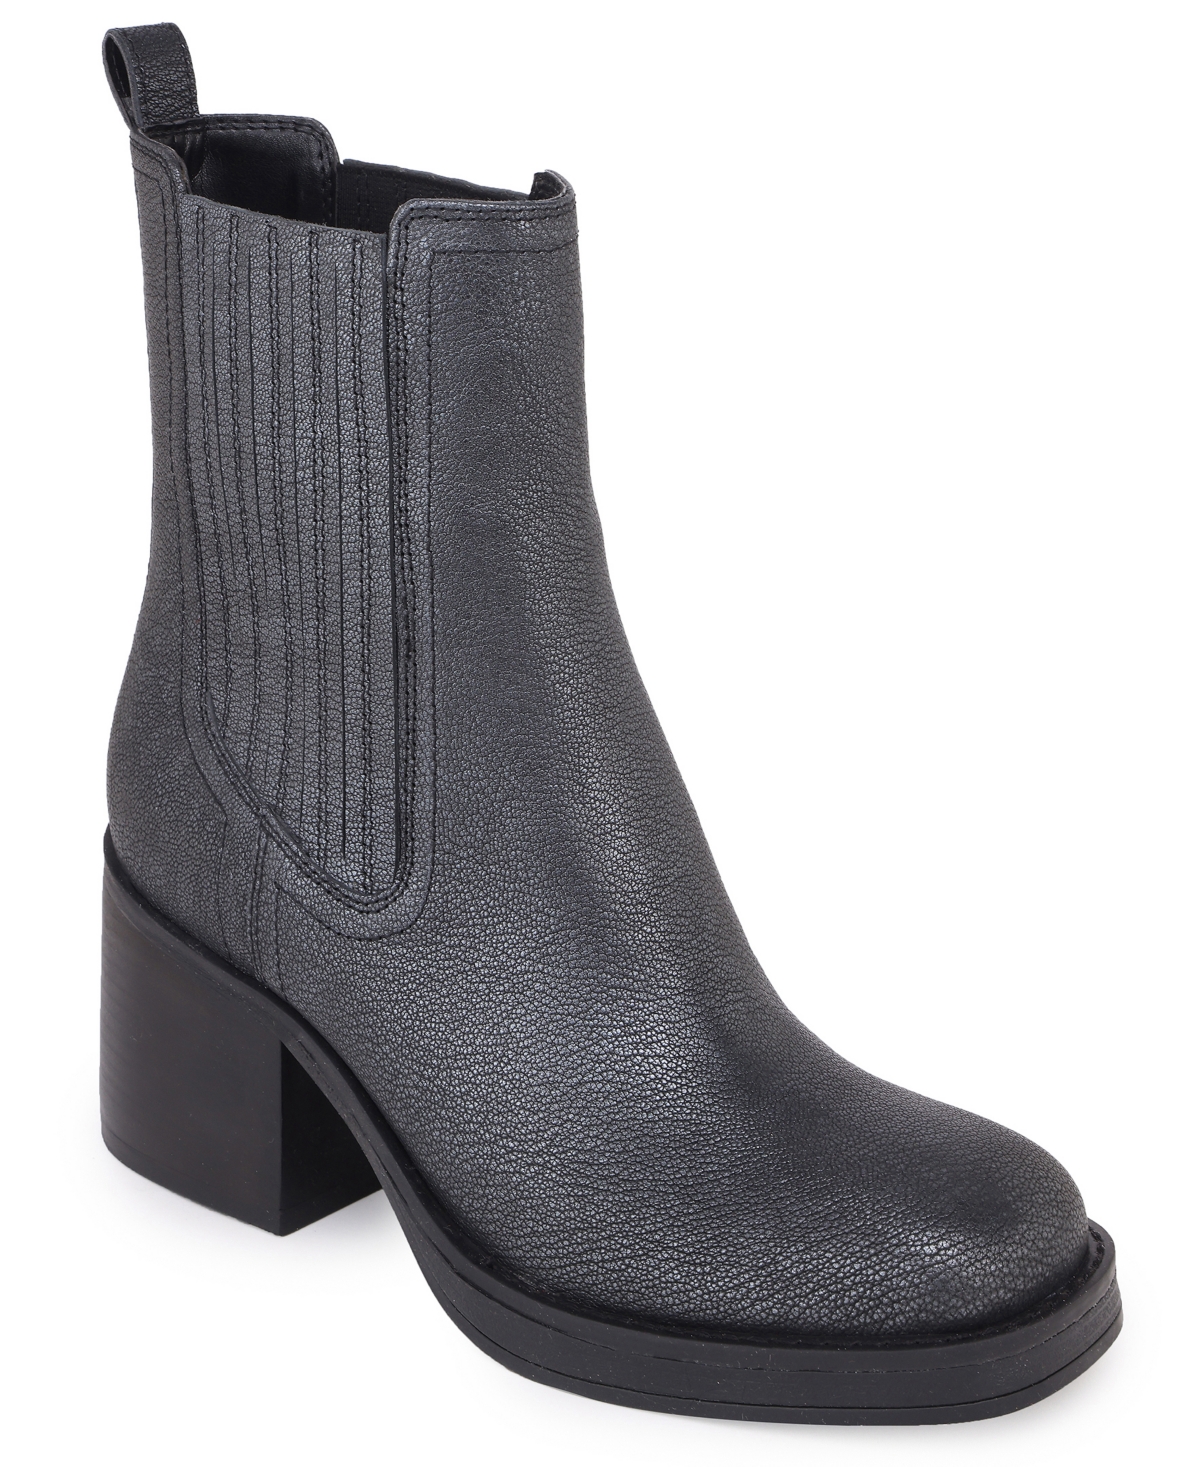 Kenneth Cole New York Women's Jet Chelsea Boots Women's Shoes